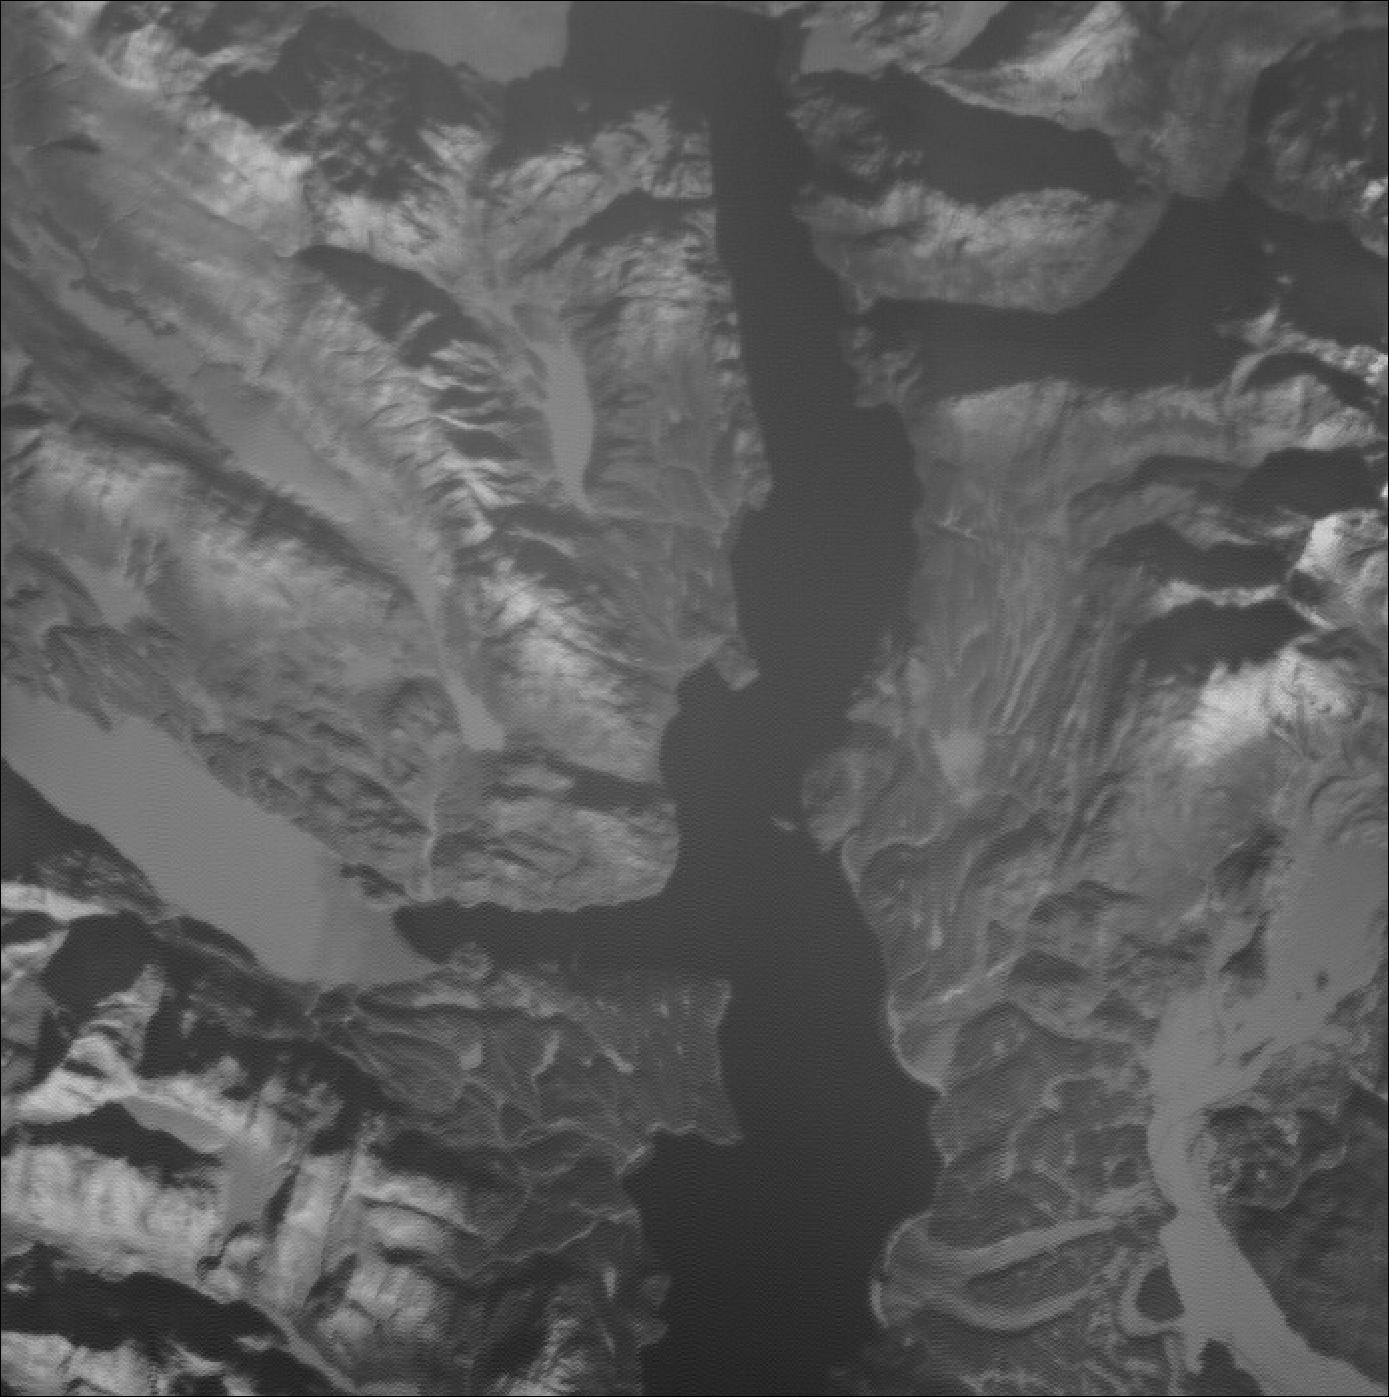 Figure 26: MICS NIR image of a portion of Glacier Bay National Park, located in Southeast Alaska west of Juneau. The image was acquired on 3 May 2018 (image credit: IRS Stuttgart)